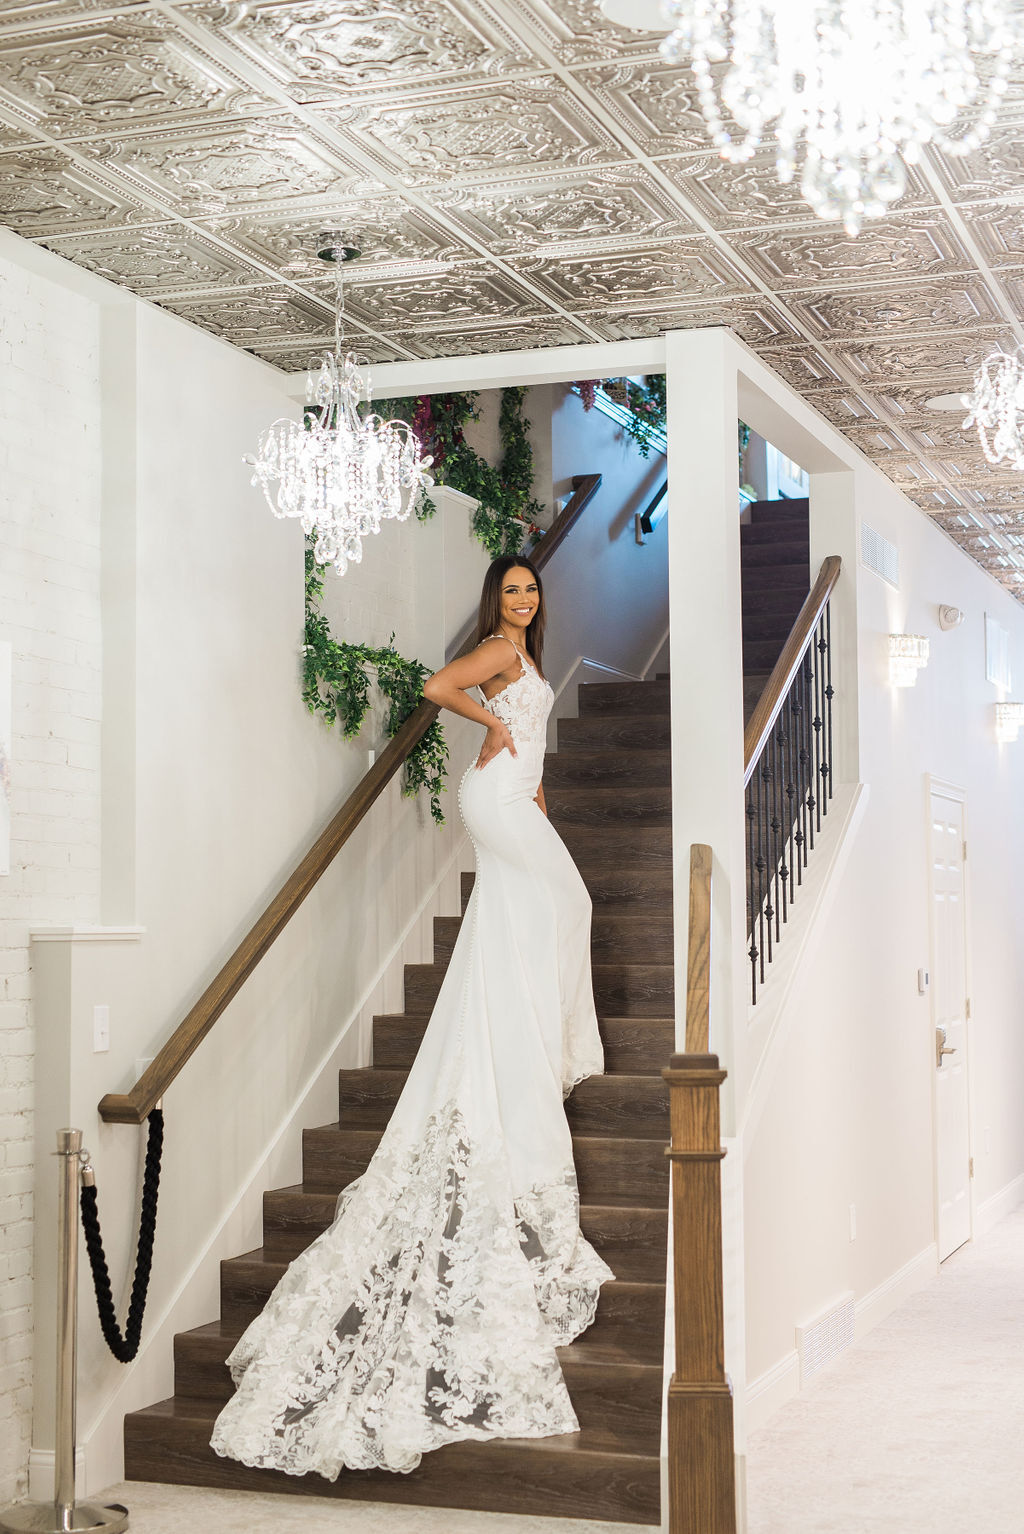 Model wearing a bridal dress on the stairs